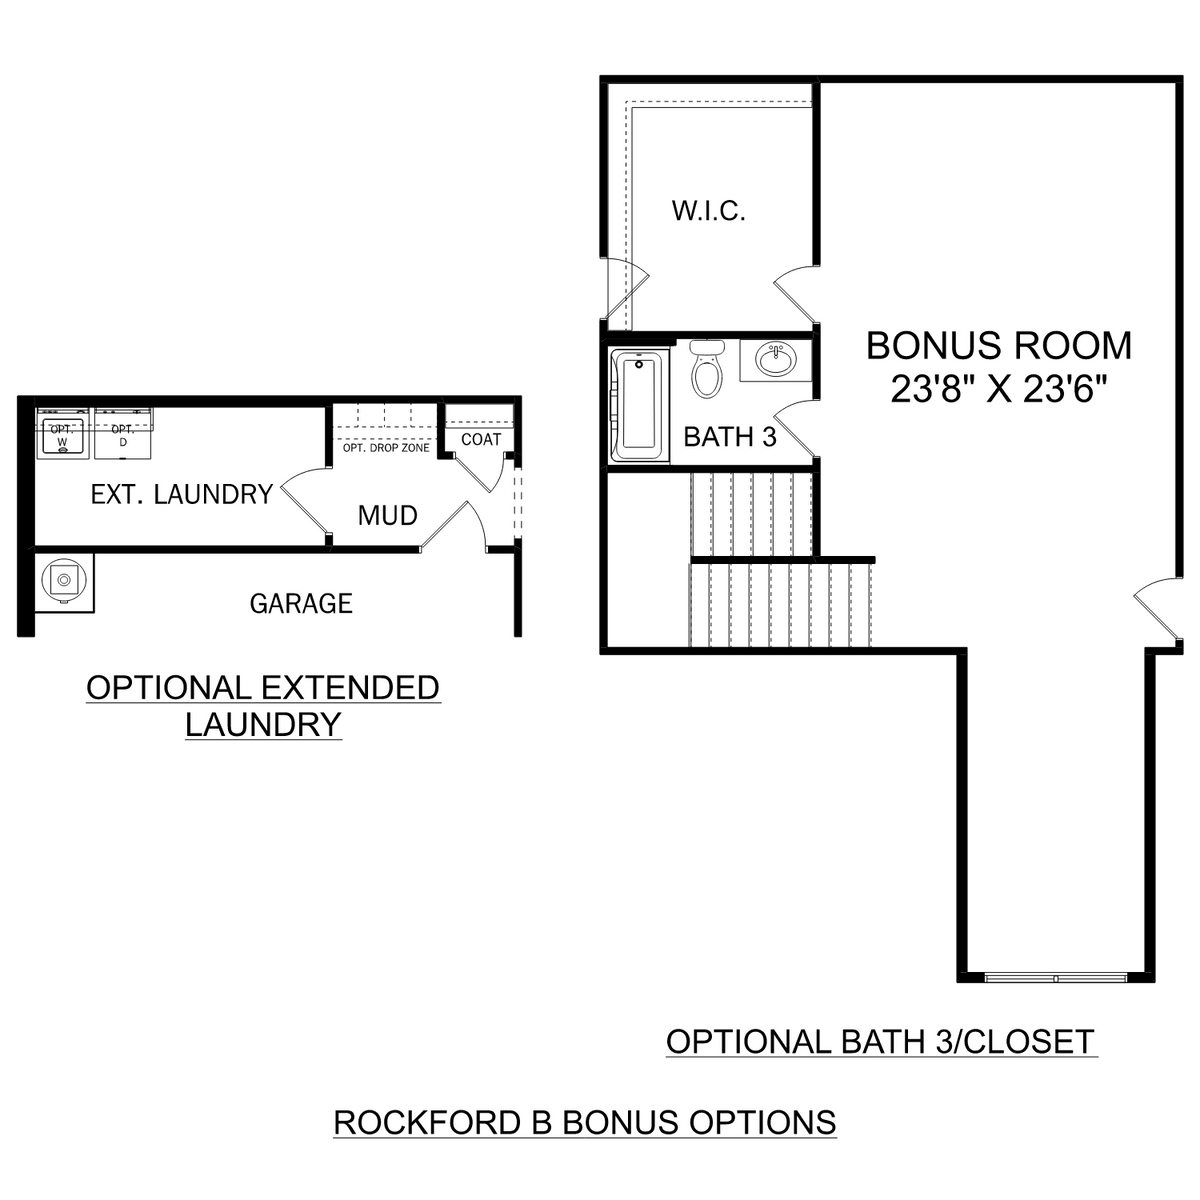 3 - The Rockford B with Bonus buildable floor plan layout in Davidson Homes' Cain Park community.